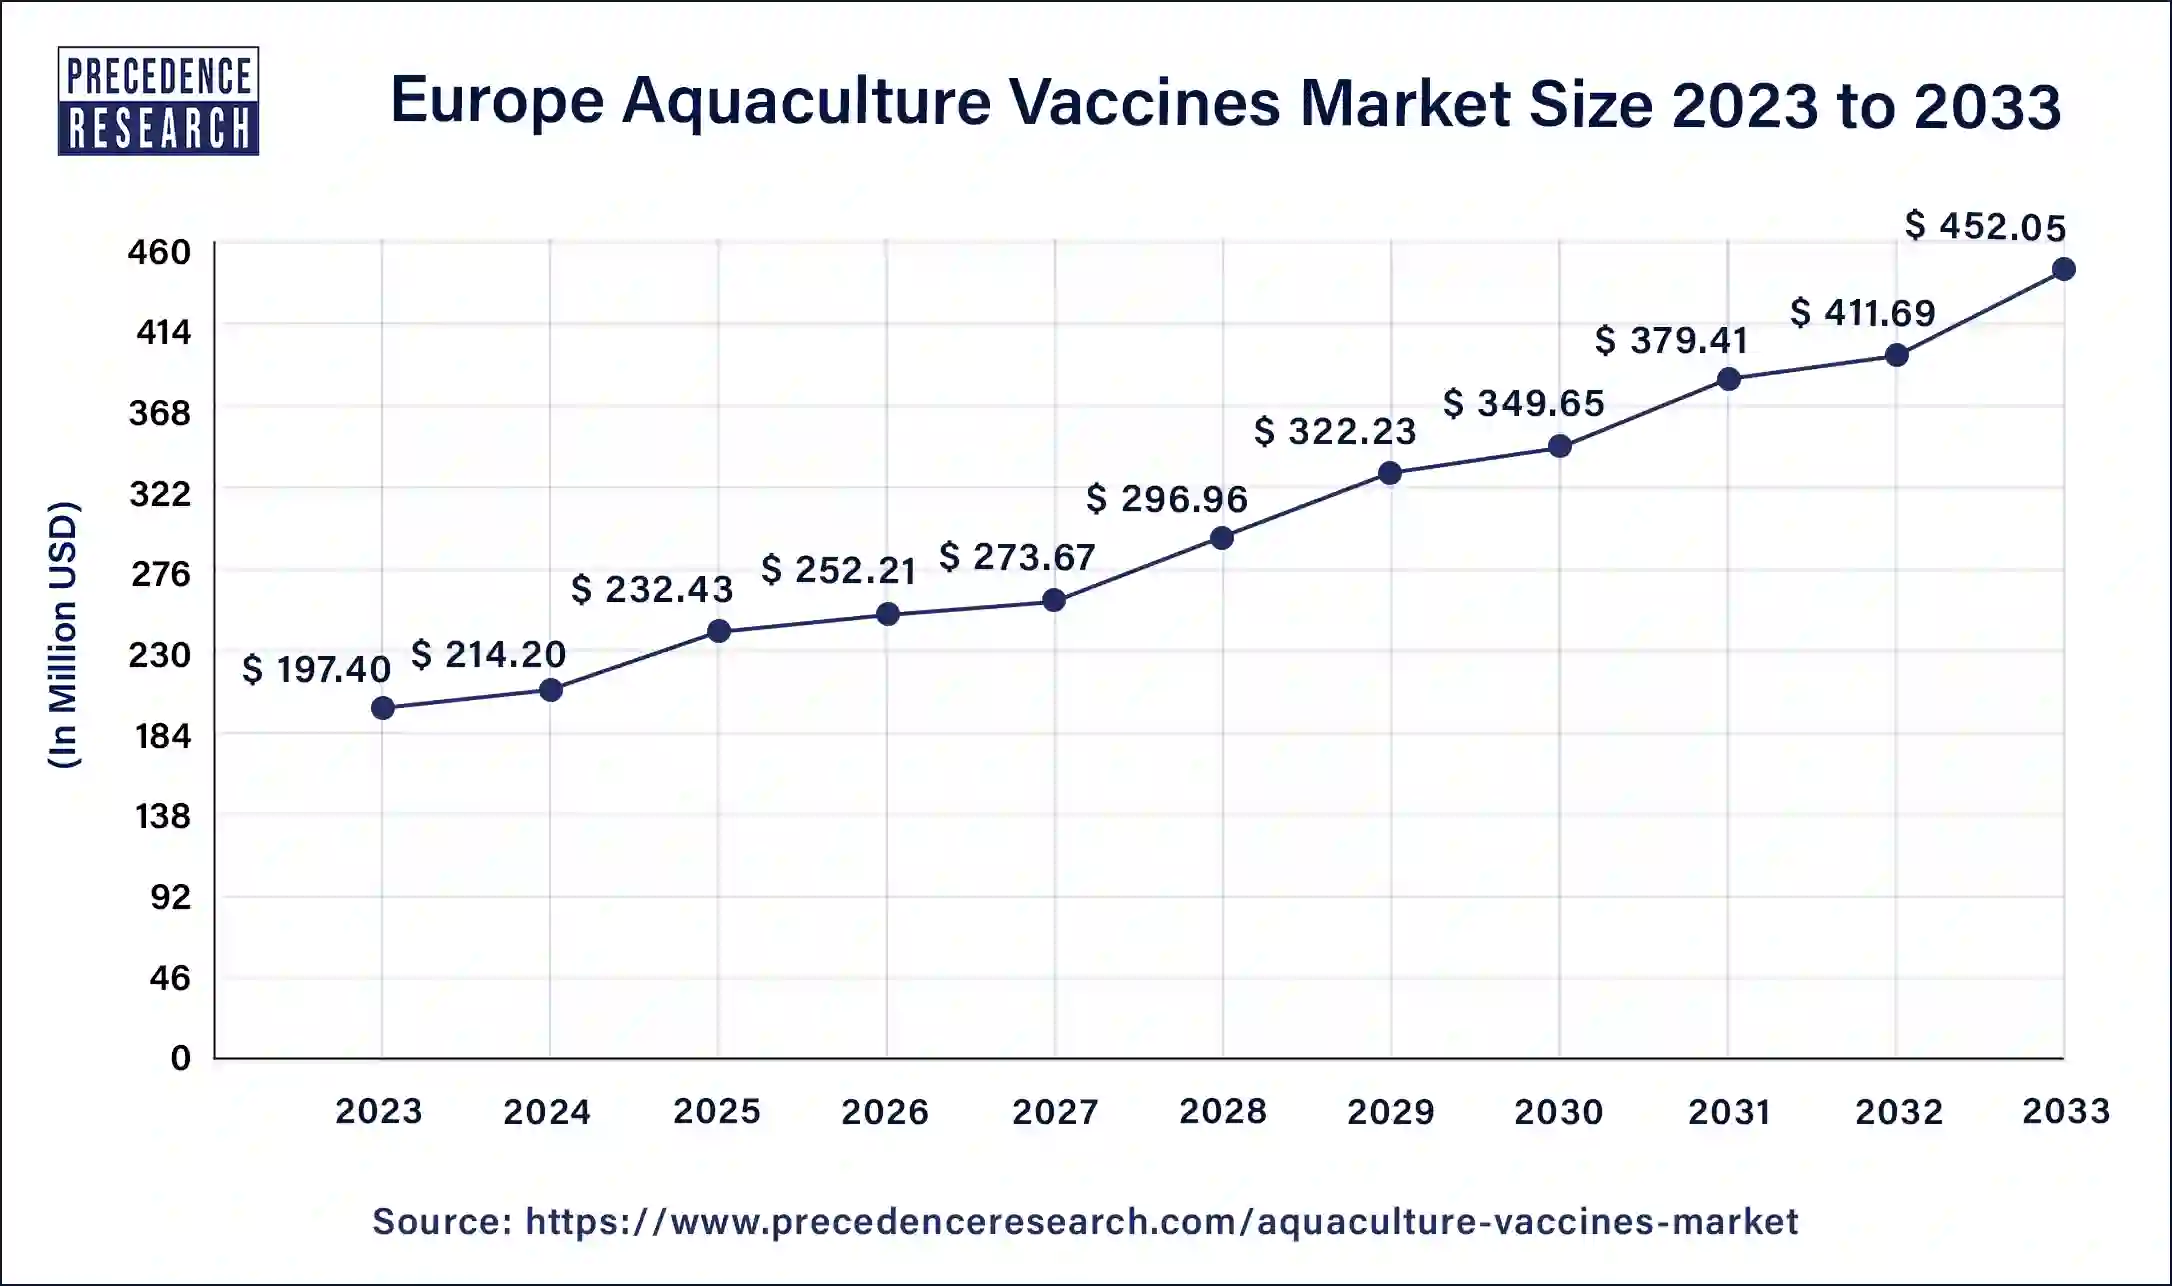 Europe Aquaculture Vaccines Market Size 2024 to 2033